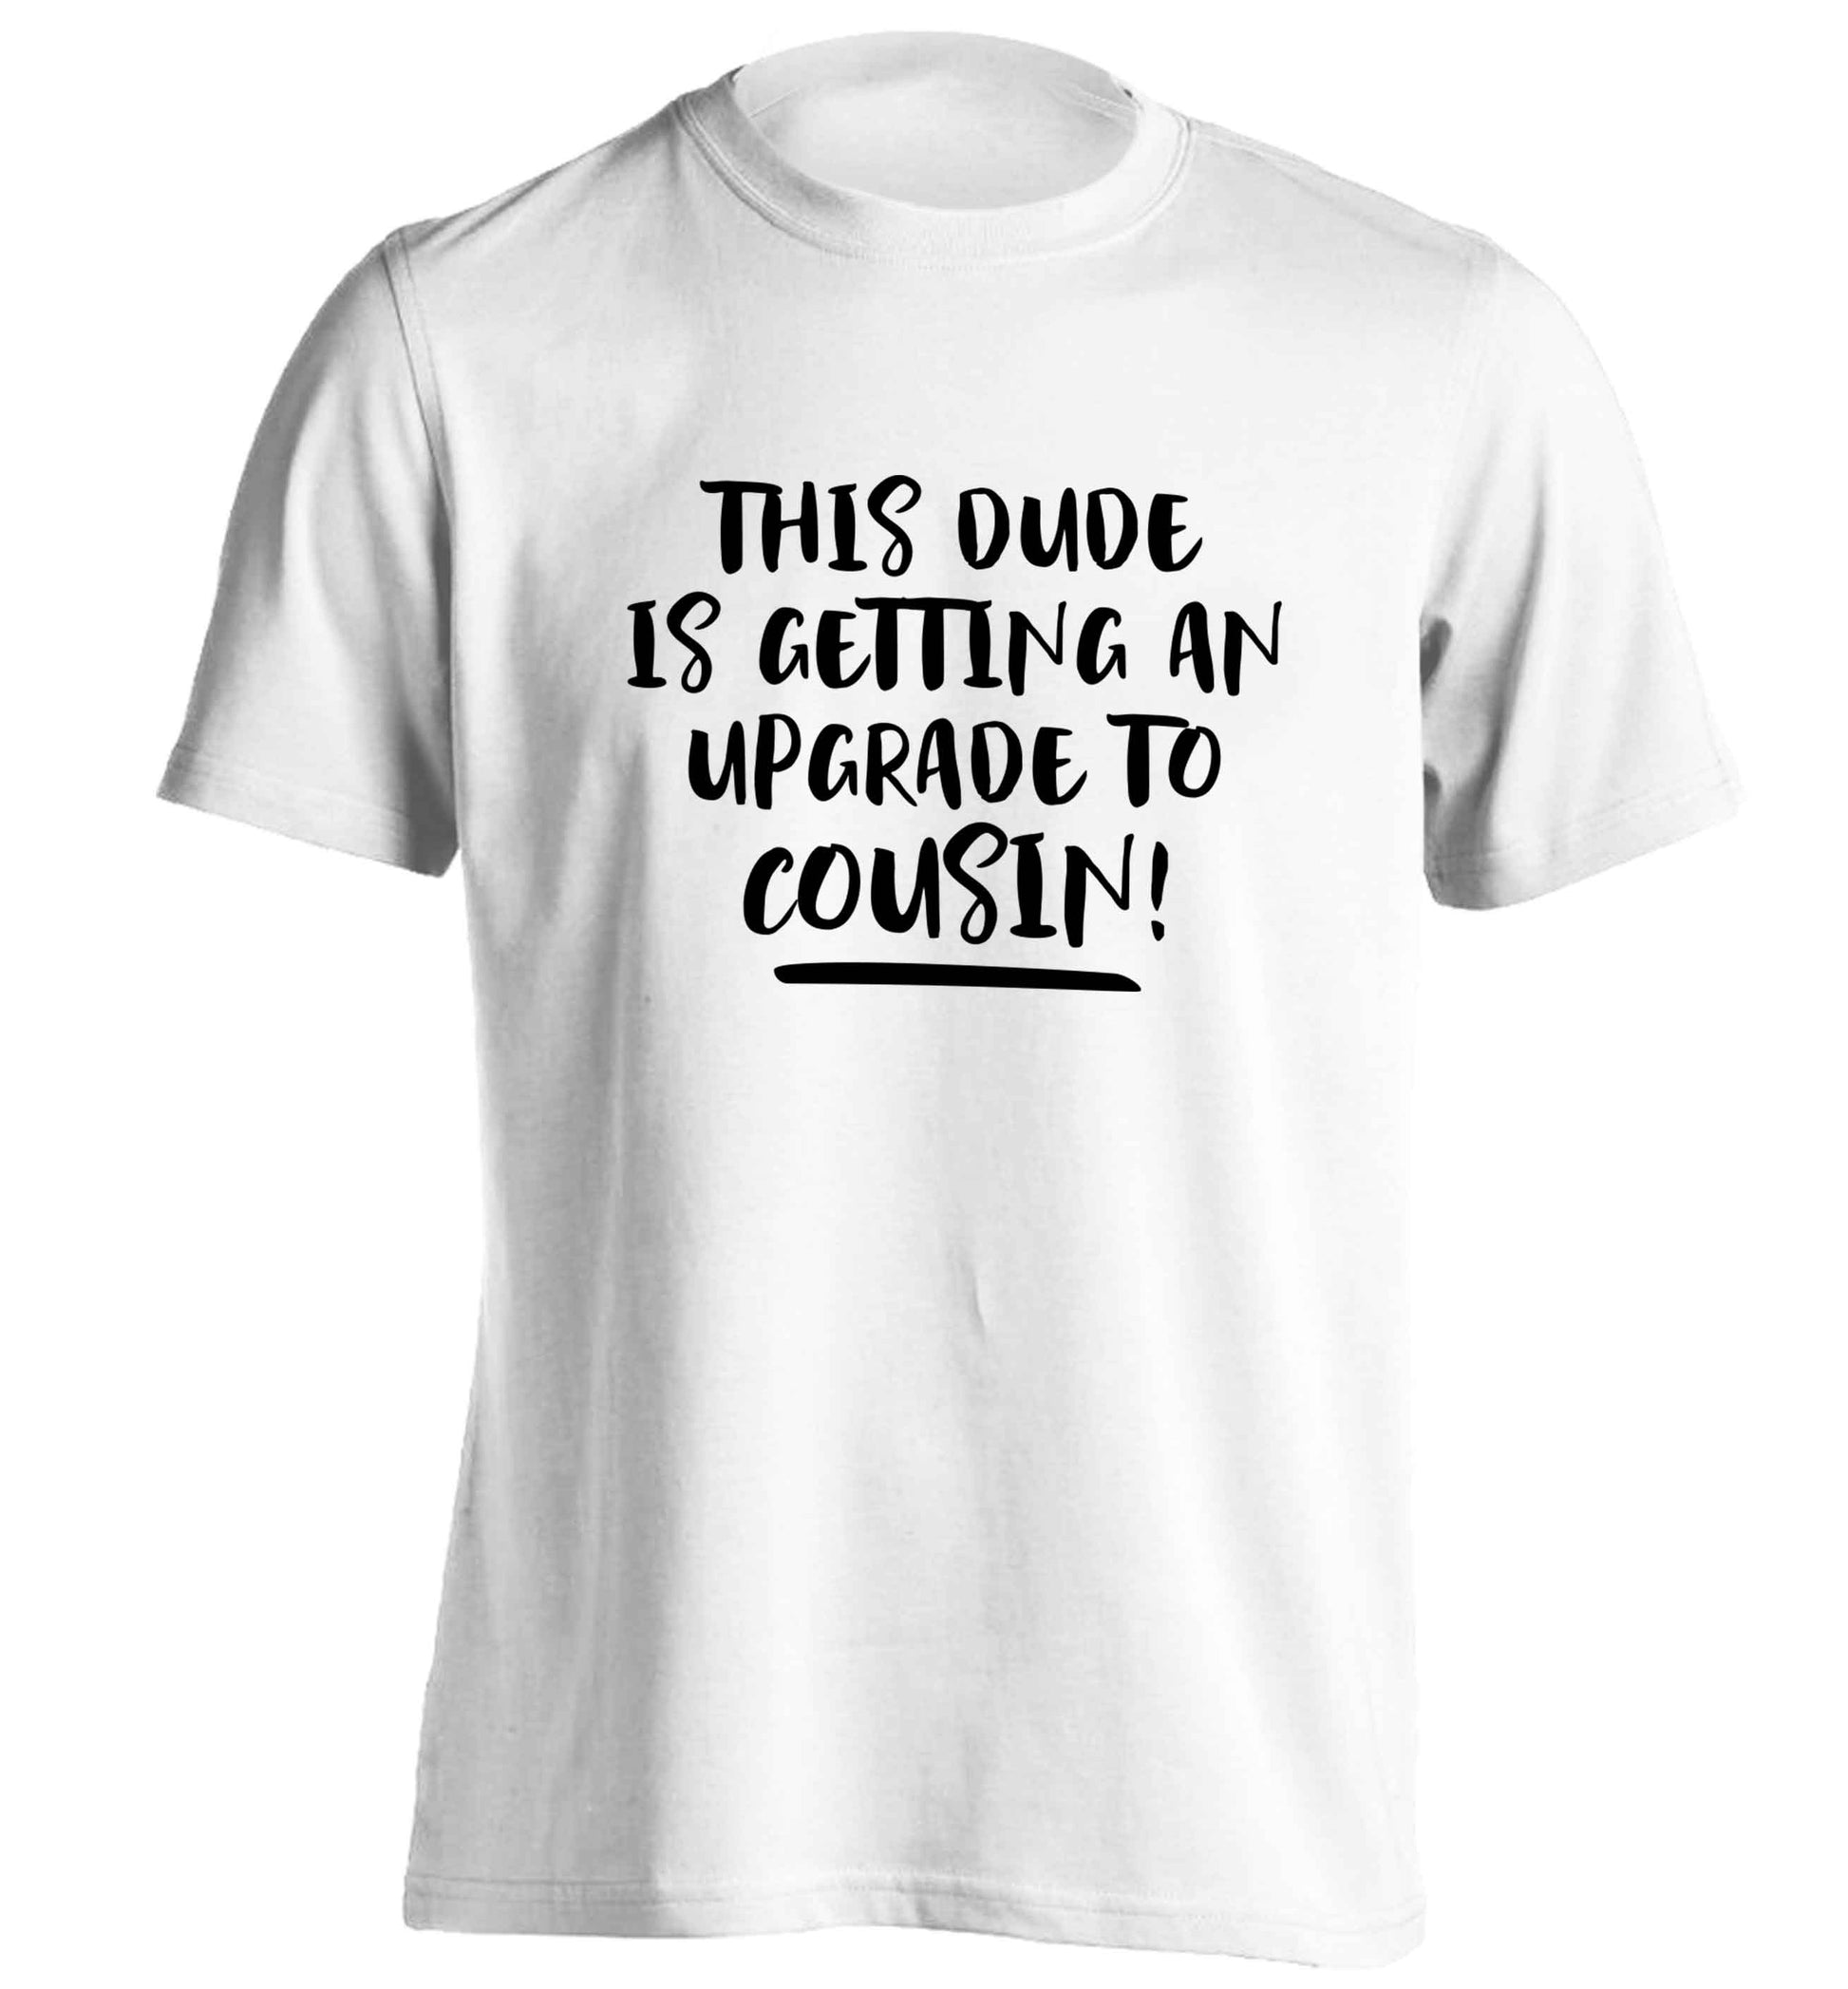 This dude is getting an upgrade to cousin! adults unisex white Tshirt 2XL